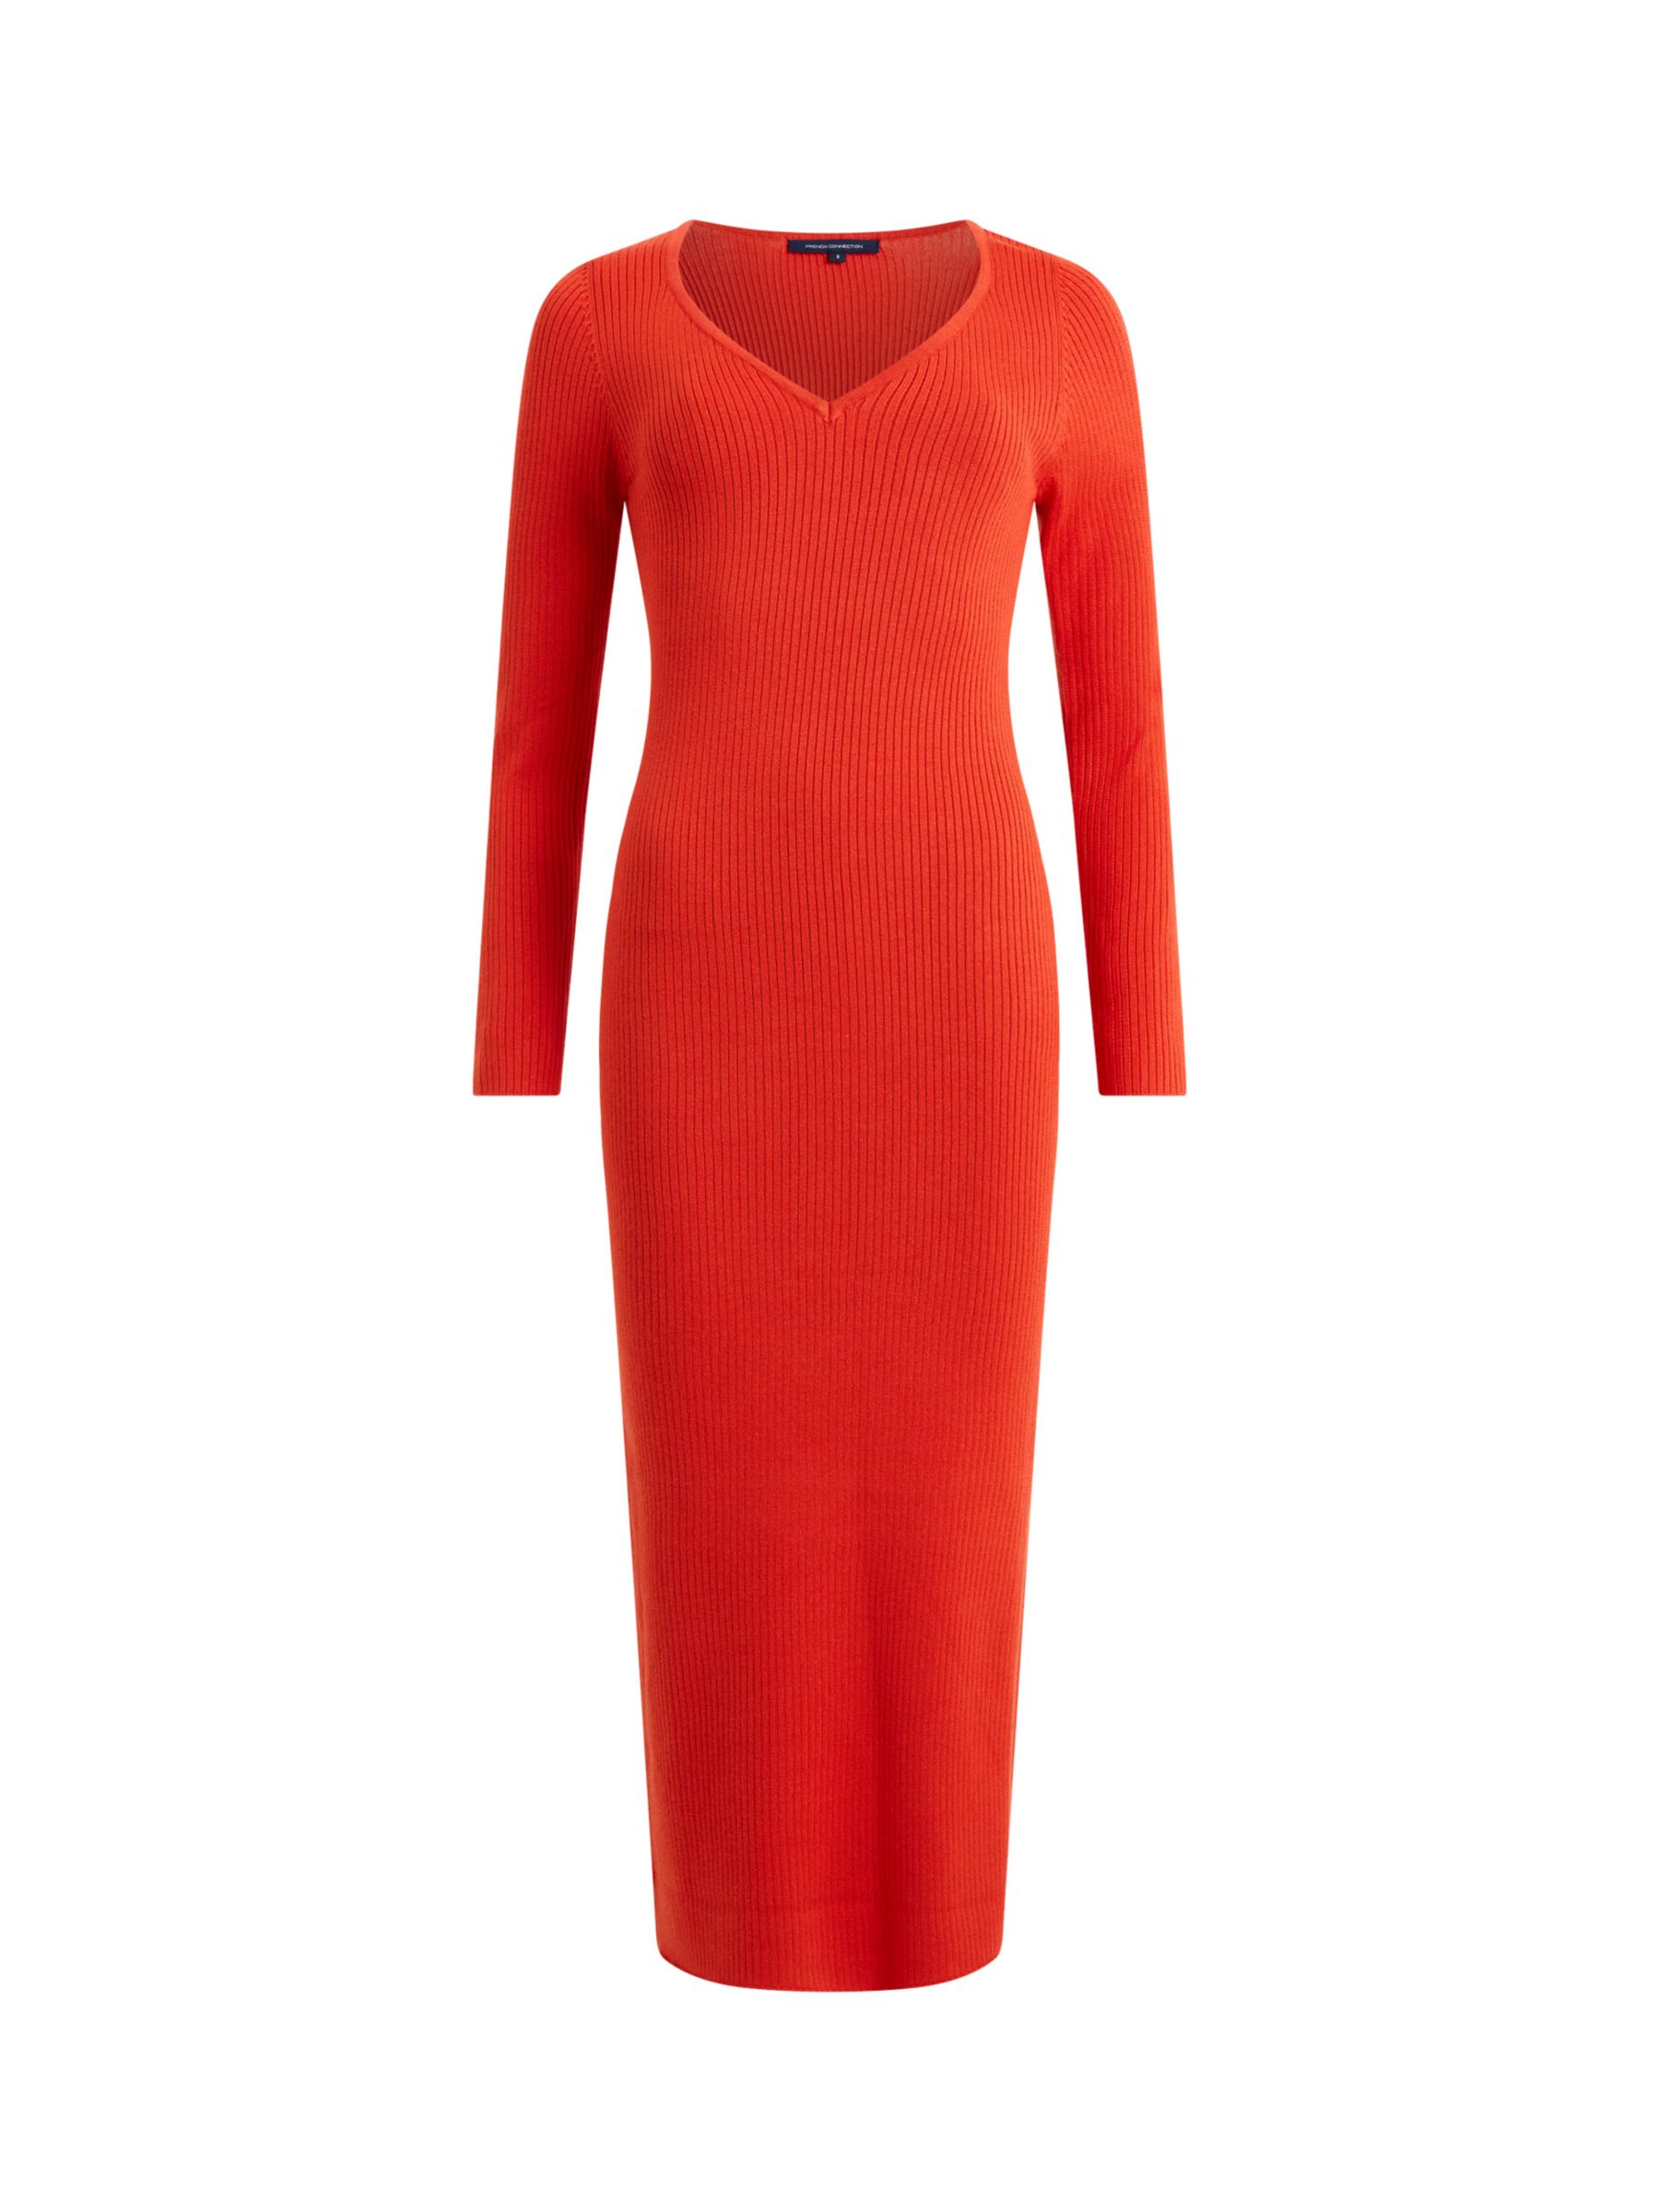 Buy French Connection Mari Knit Dress Online at johnlewis.com